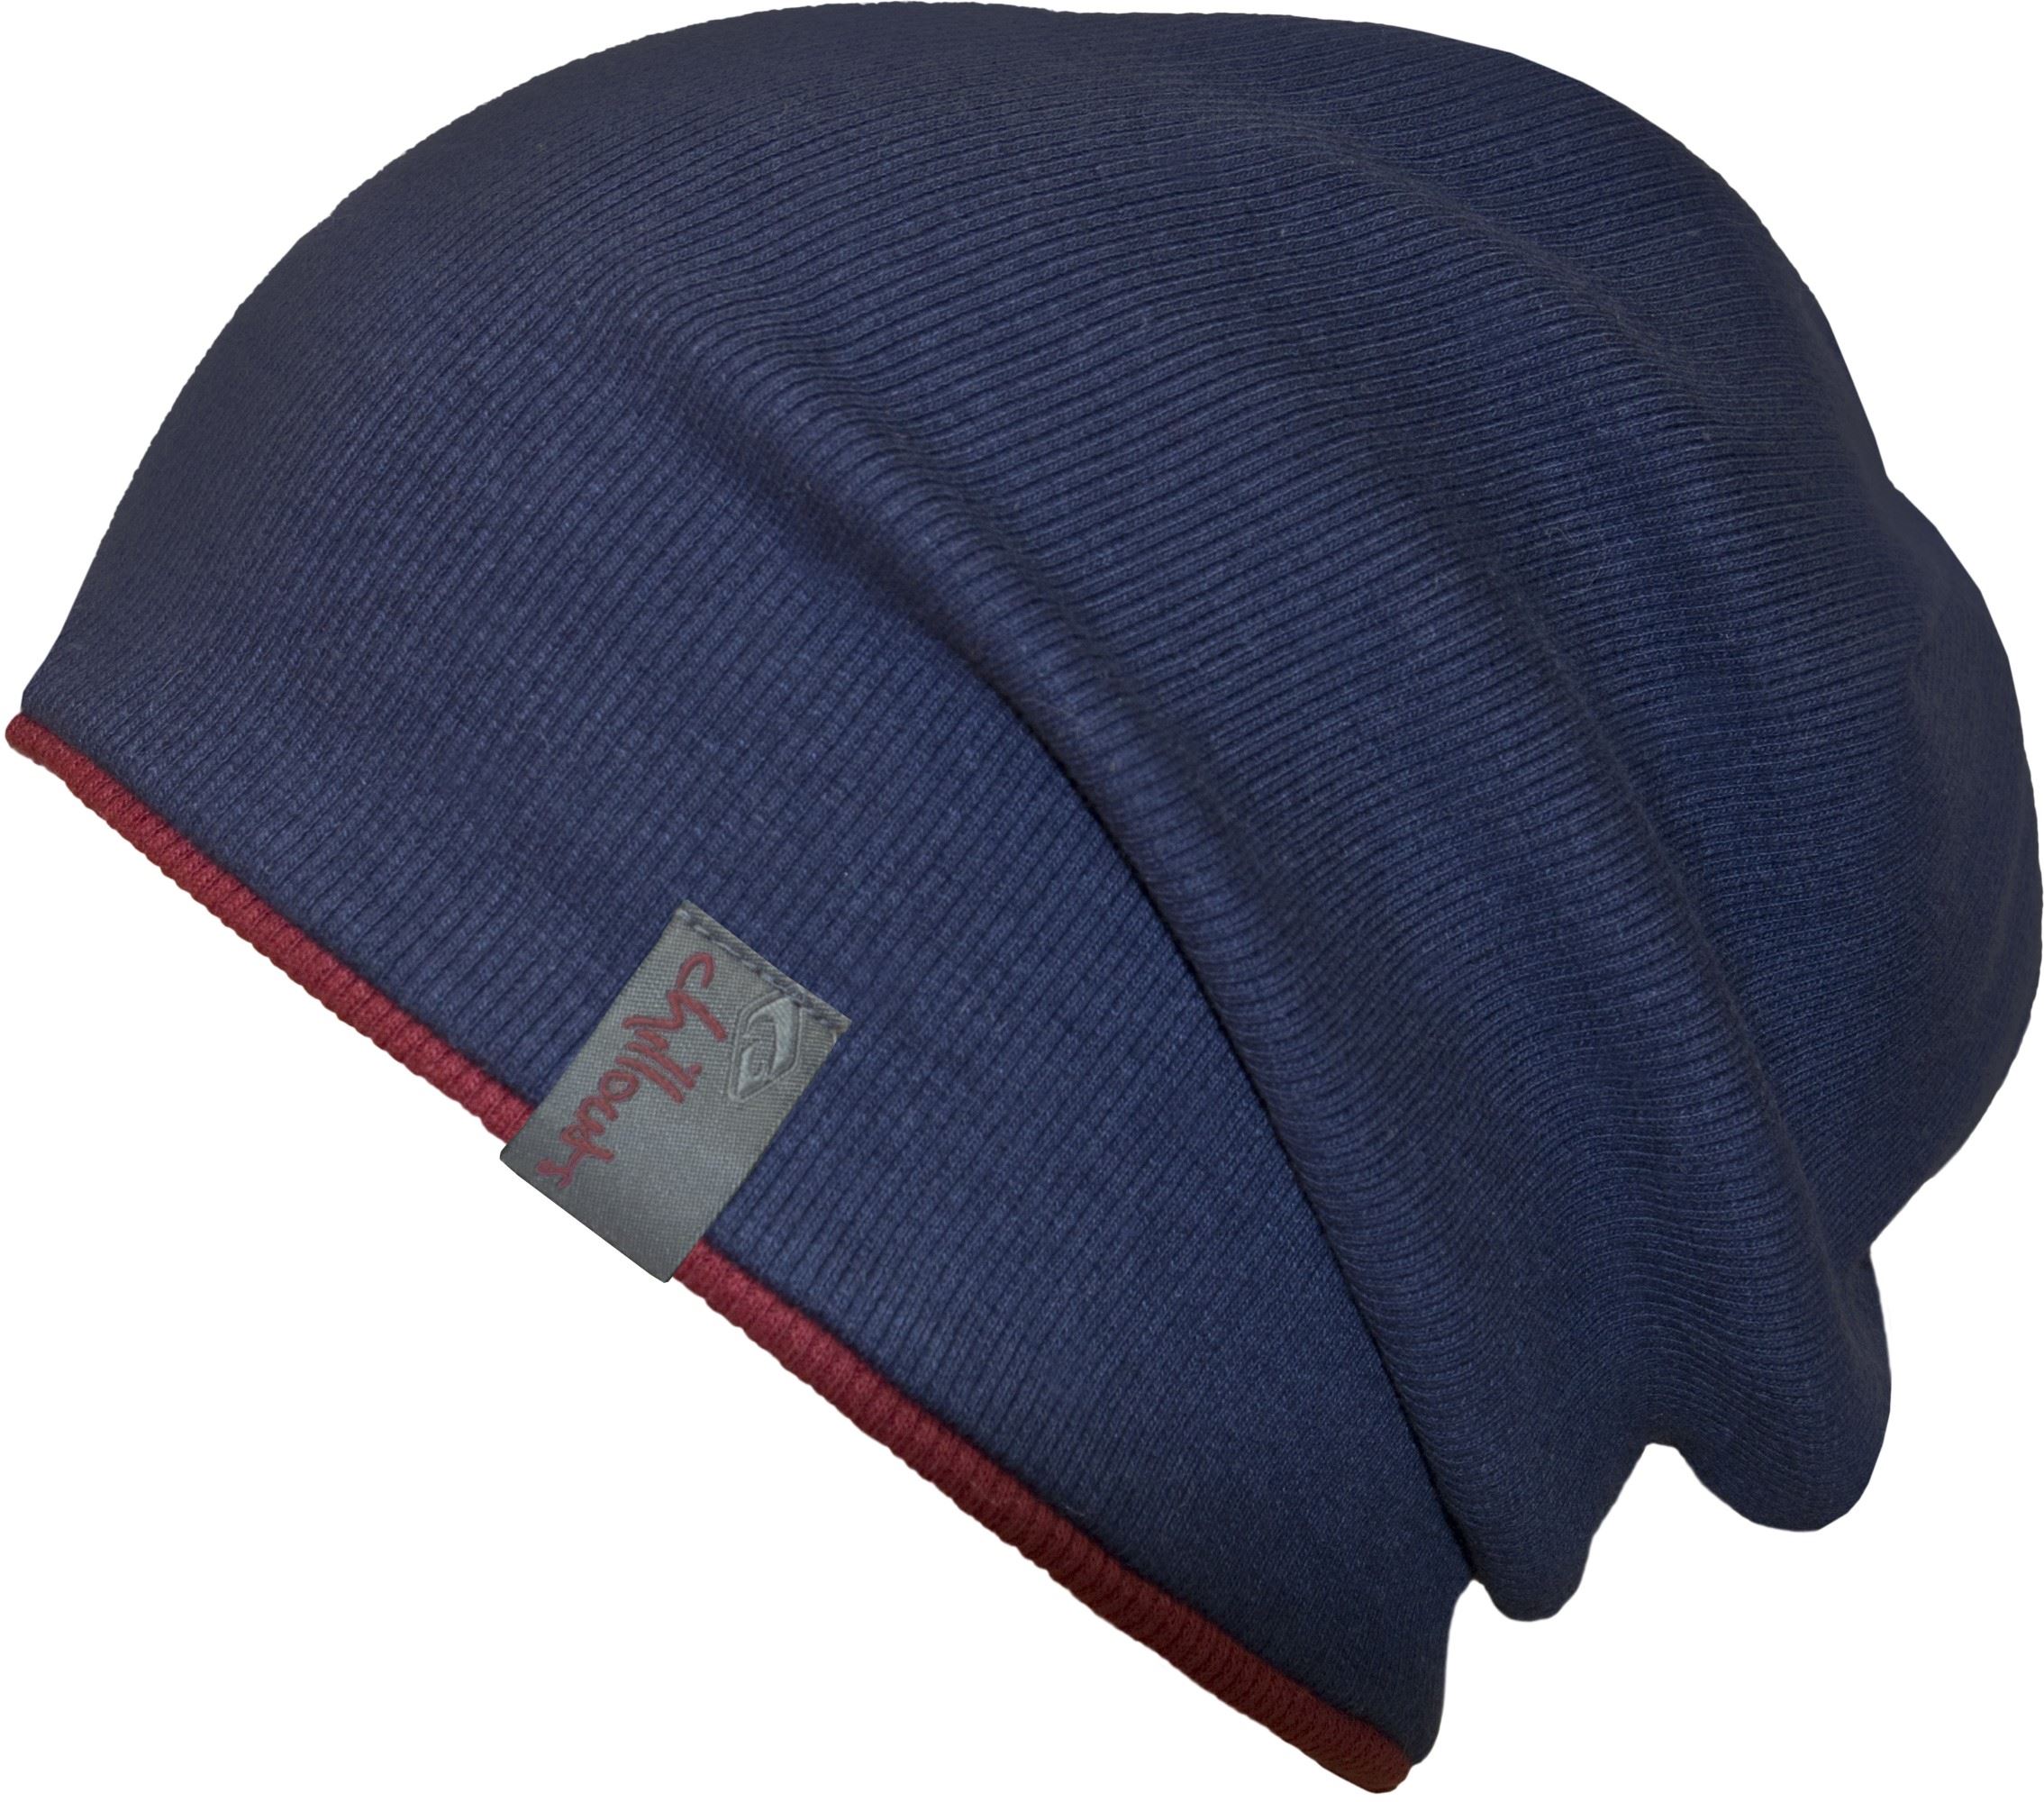 Chillouts Beanie - Brooklyn Hat 05 - Red / Blue